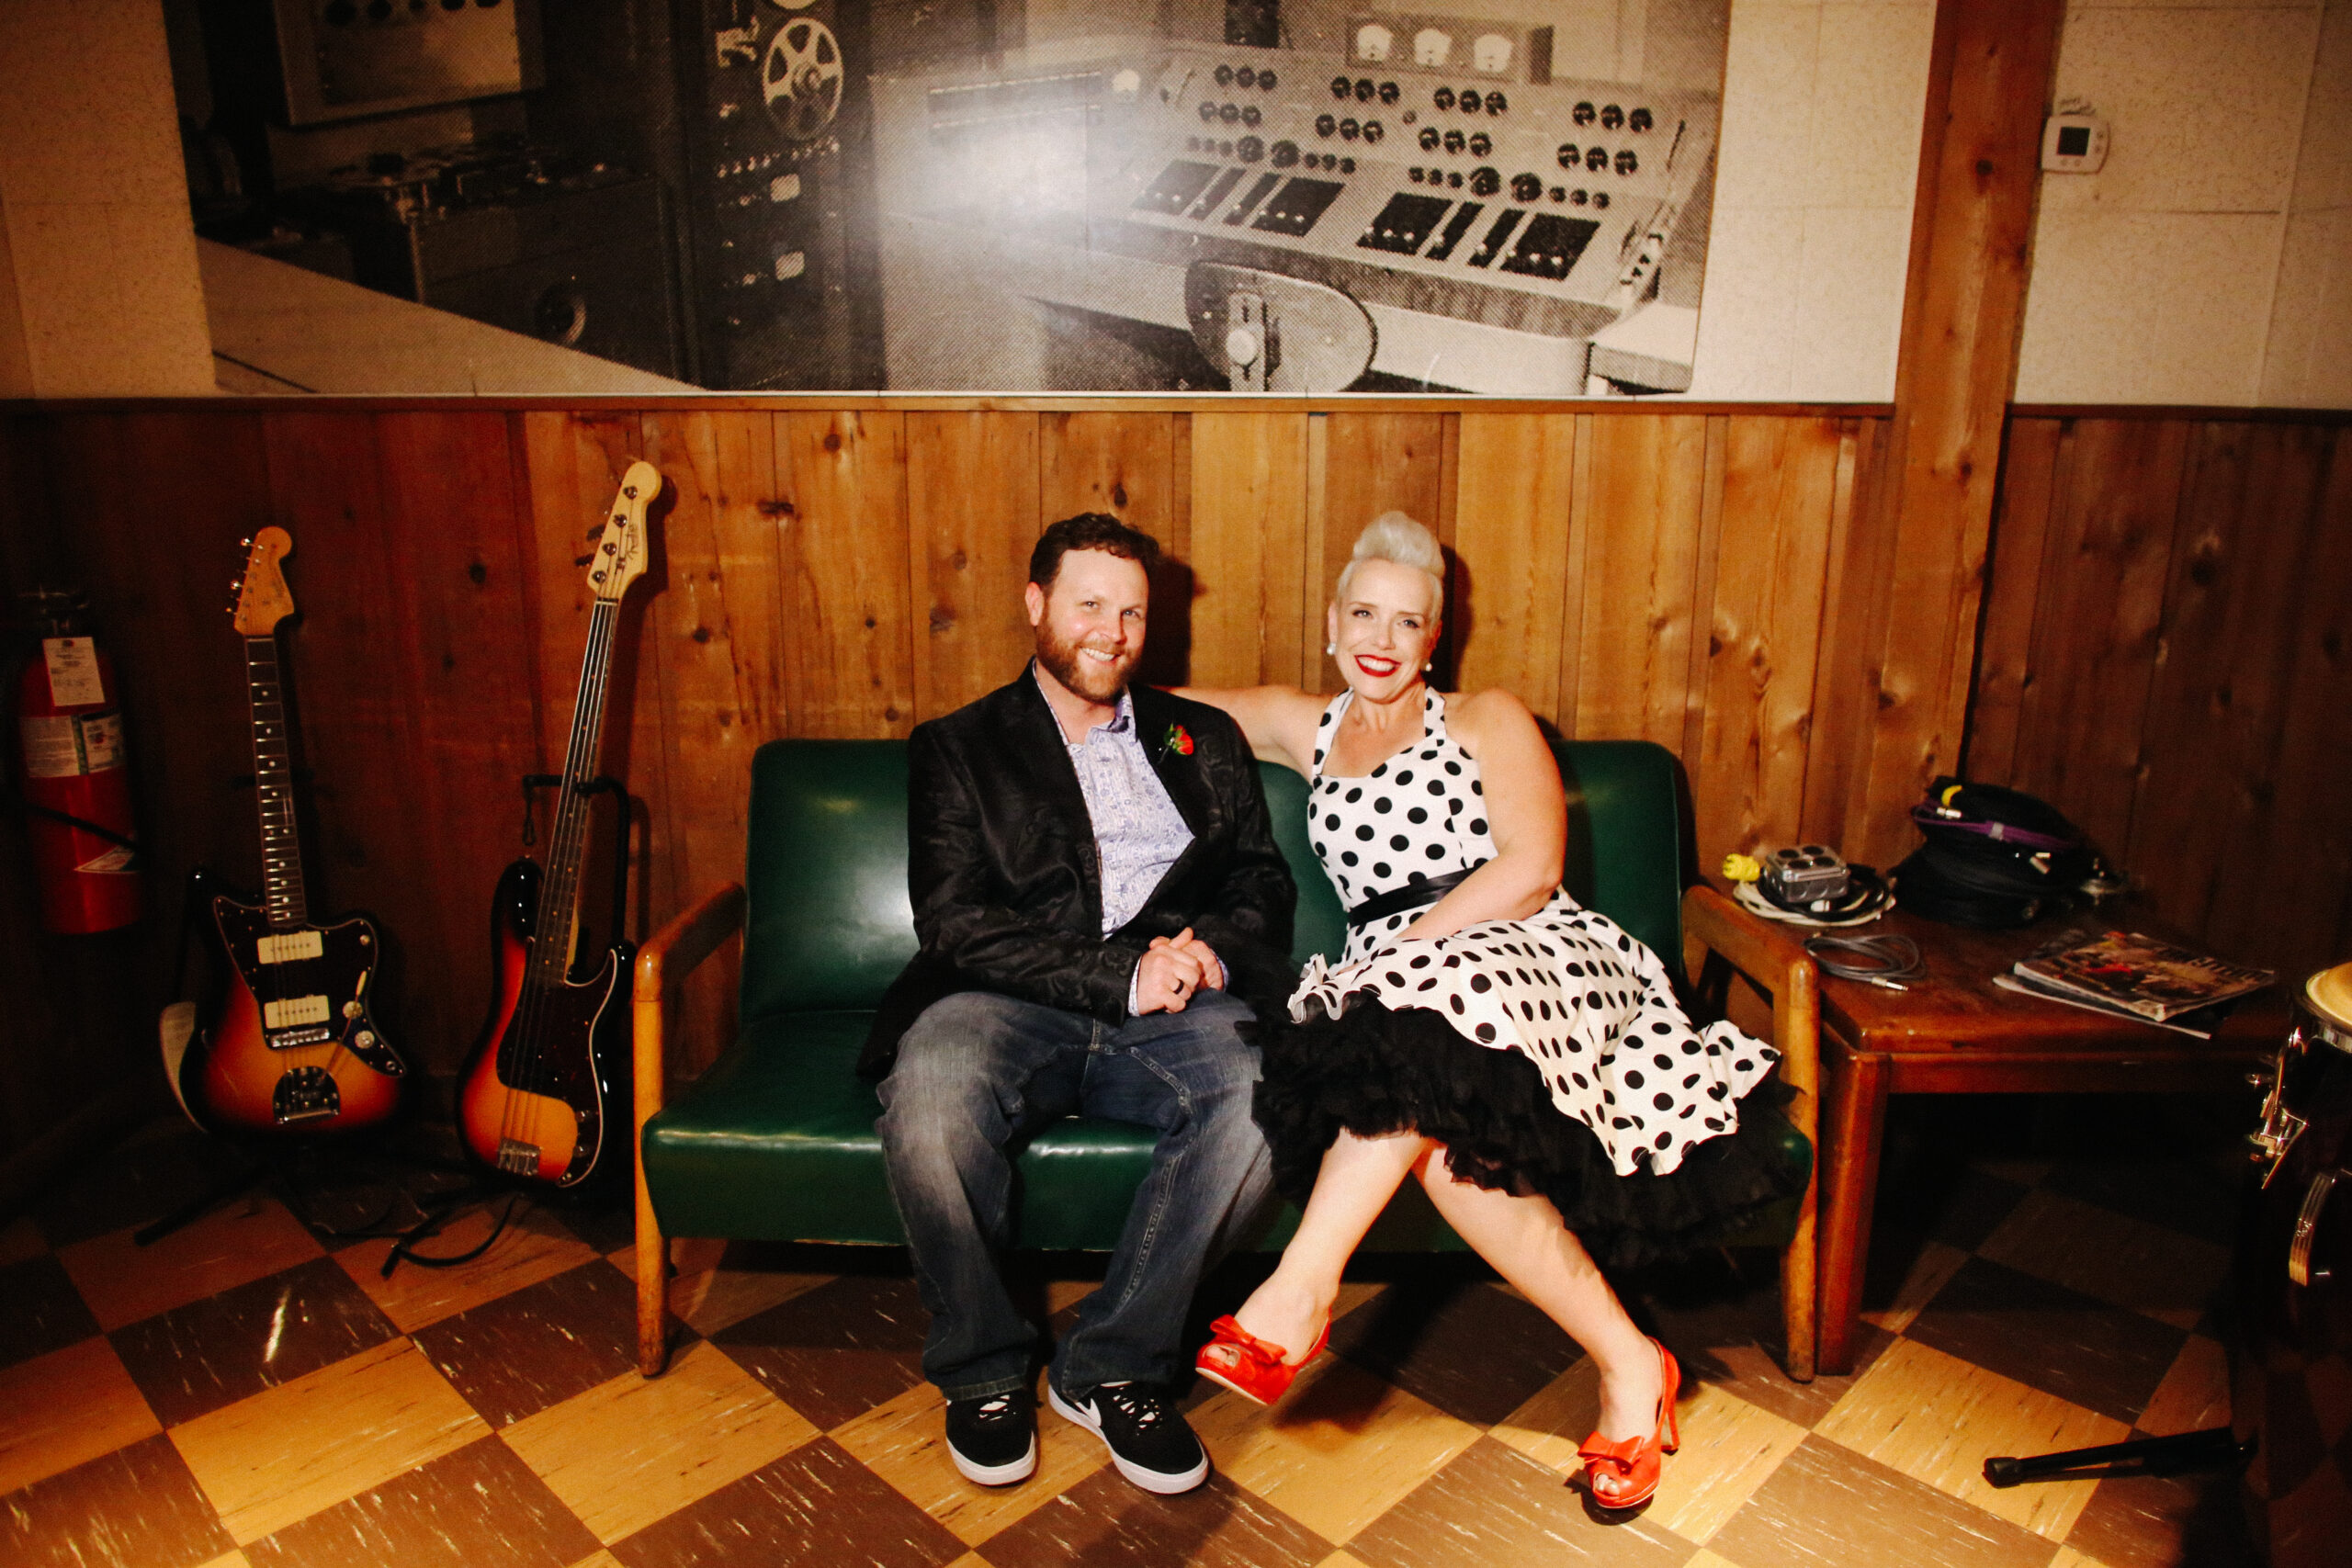 The bride and groom sit on a black mid-century couch with wooden arms at RCA Studio B. The bride has her arm around the back of the couch. The floor is black and white checkered linolium. The walls are half wood paneling and half ivory wallpaper. Above their heads is a large black and white photo of a sound board at RCA Studio B. On the left of the couch are two electric guitars on stands. To the right of the couch is a small wooden end table with a black telephone, two magazines and an electrical outlet. The bride is wearing a halter neck white pinup dress with black polka dots. She has a black belt and a black crinoline petticoat with large pearl earrings. The bride has bright red lipstick to match her bright red peep toe shoes with a small bow. The groom is wearing a black silk suit jacket with a paisley pattern, a white shirt with small blue flowers, a red rose boutonniere and dark washed jeans and black sneakers. 